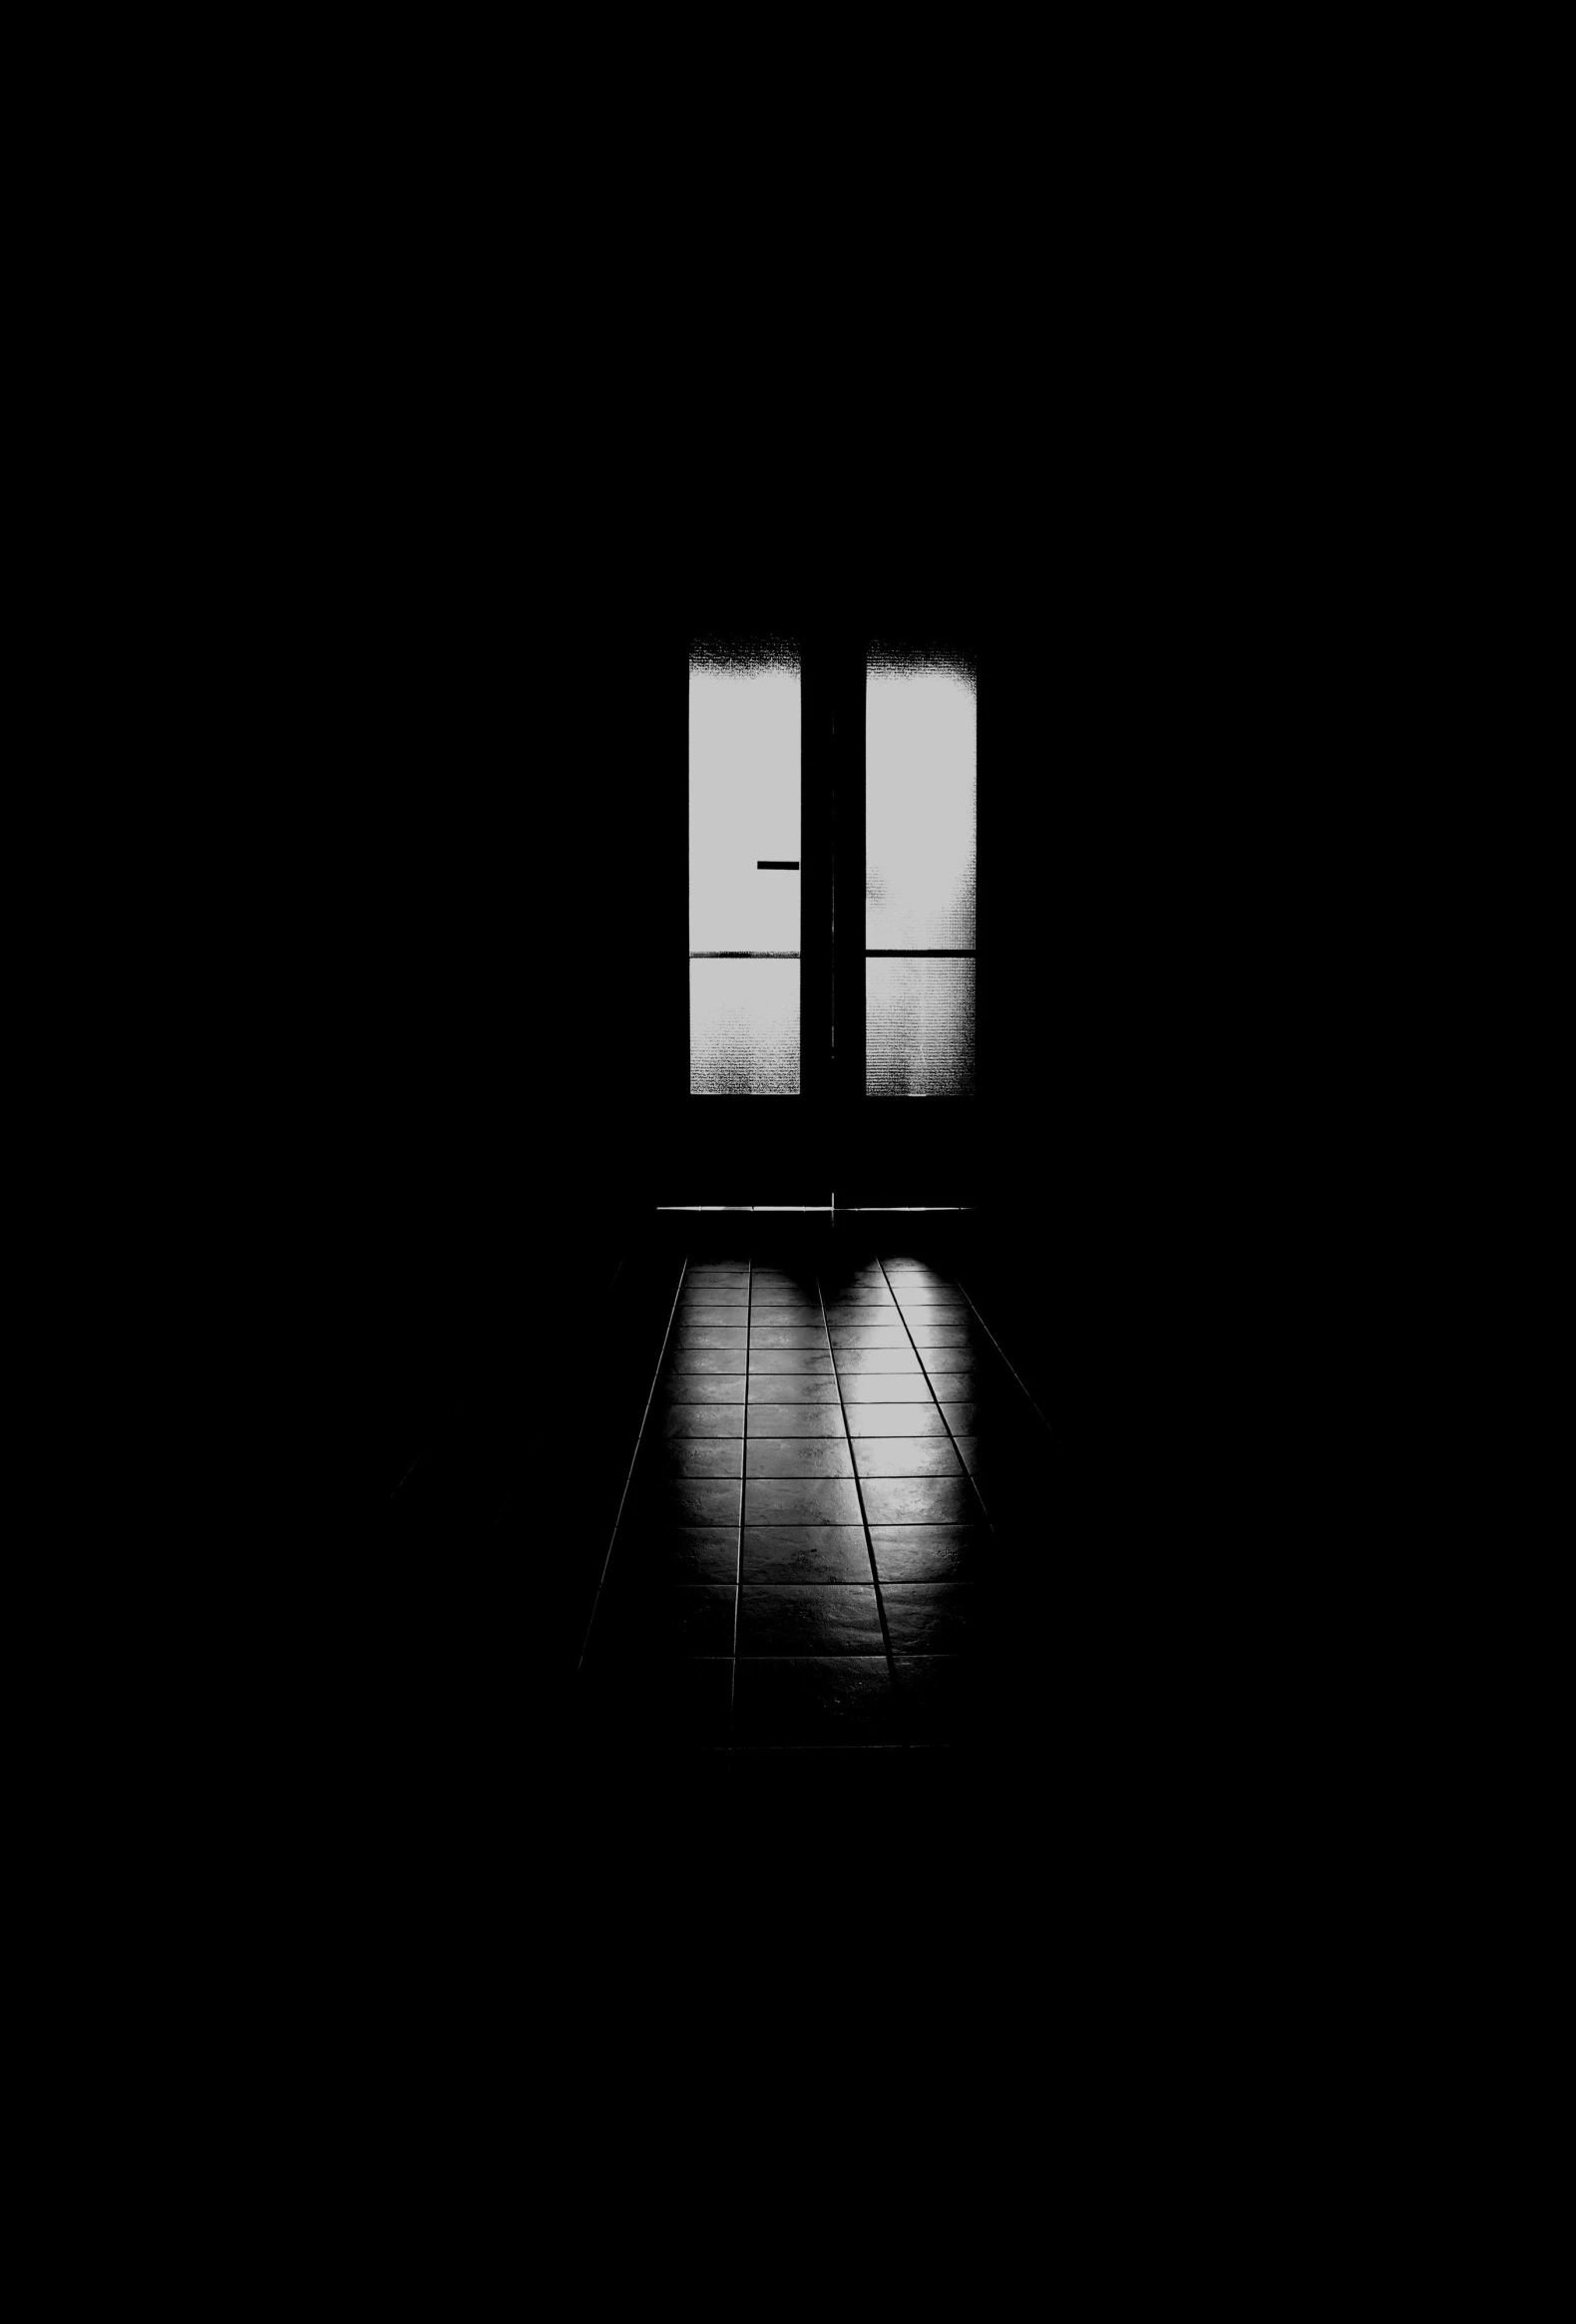 a black and white photo of a door in a dark room, a black and white photo, by Zsolt Bodoni, conceptual art, ffffound, dark ambient album cover, early morning mood, black floor